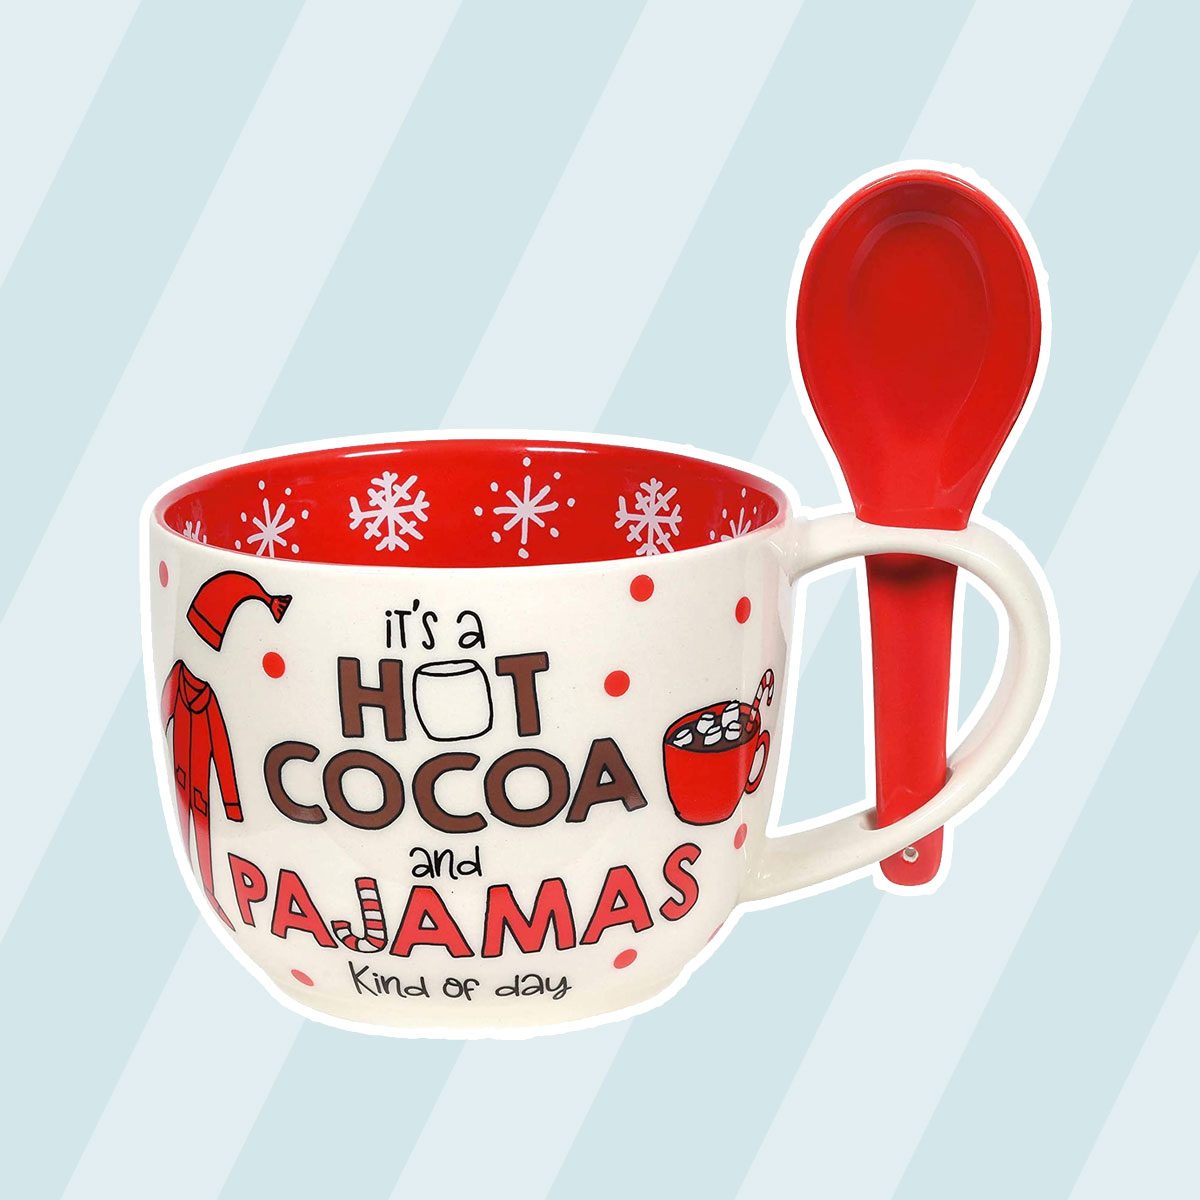 https://www.tasteofhome.com/wp-content/uploads/2020/12/Holiday-Hot-Cocoa-Mug-and-Spoon-Set.jpg?fit=700%2C700